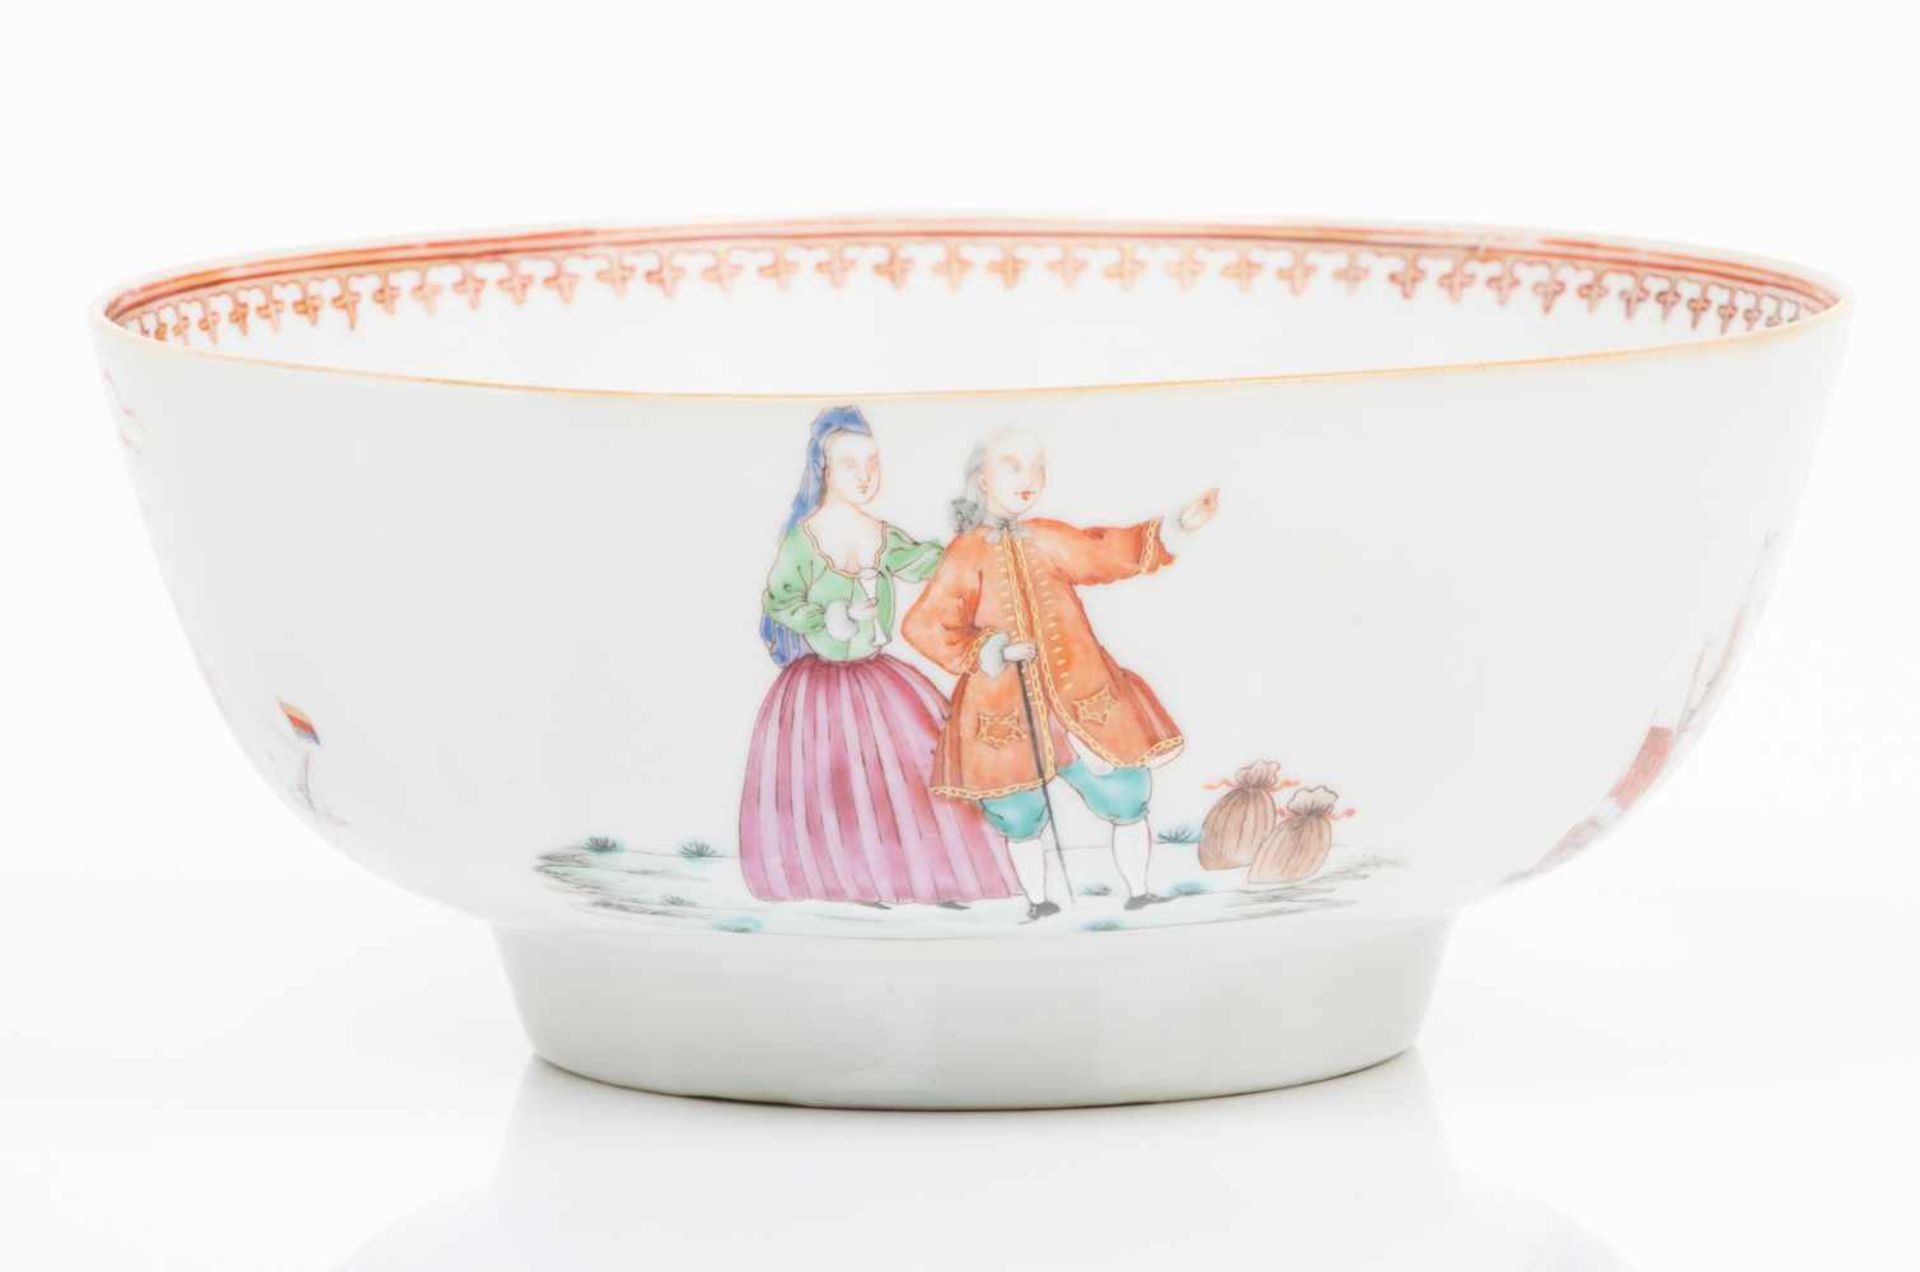 A punch bowlChinese export porcelainPolychrome "Famille Rose" enamels decoration with ships and - Image 2 of 2